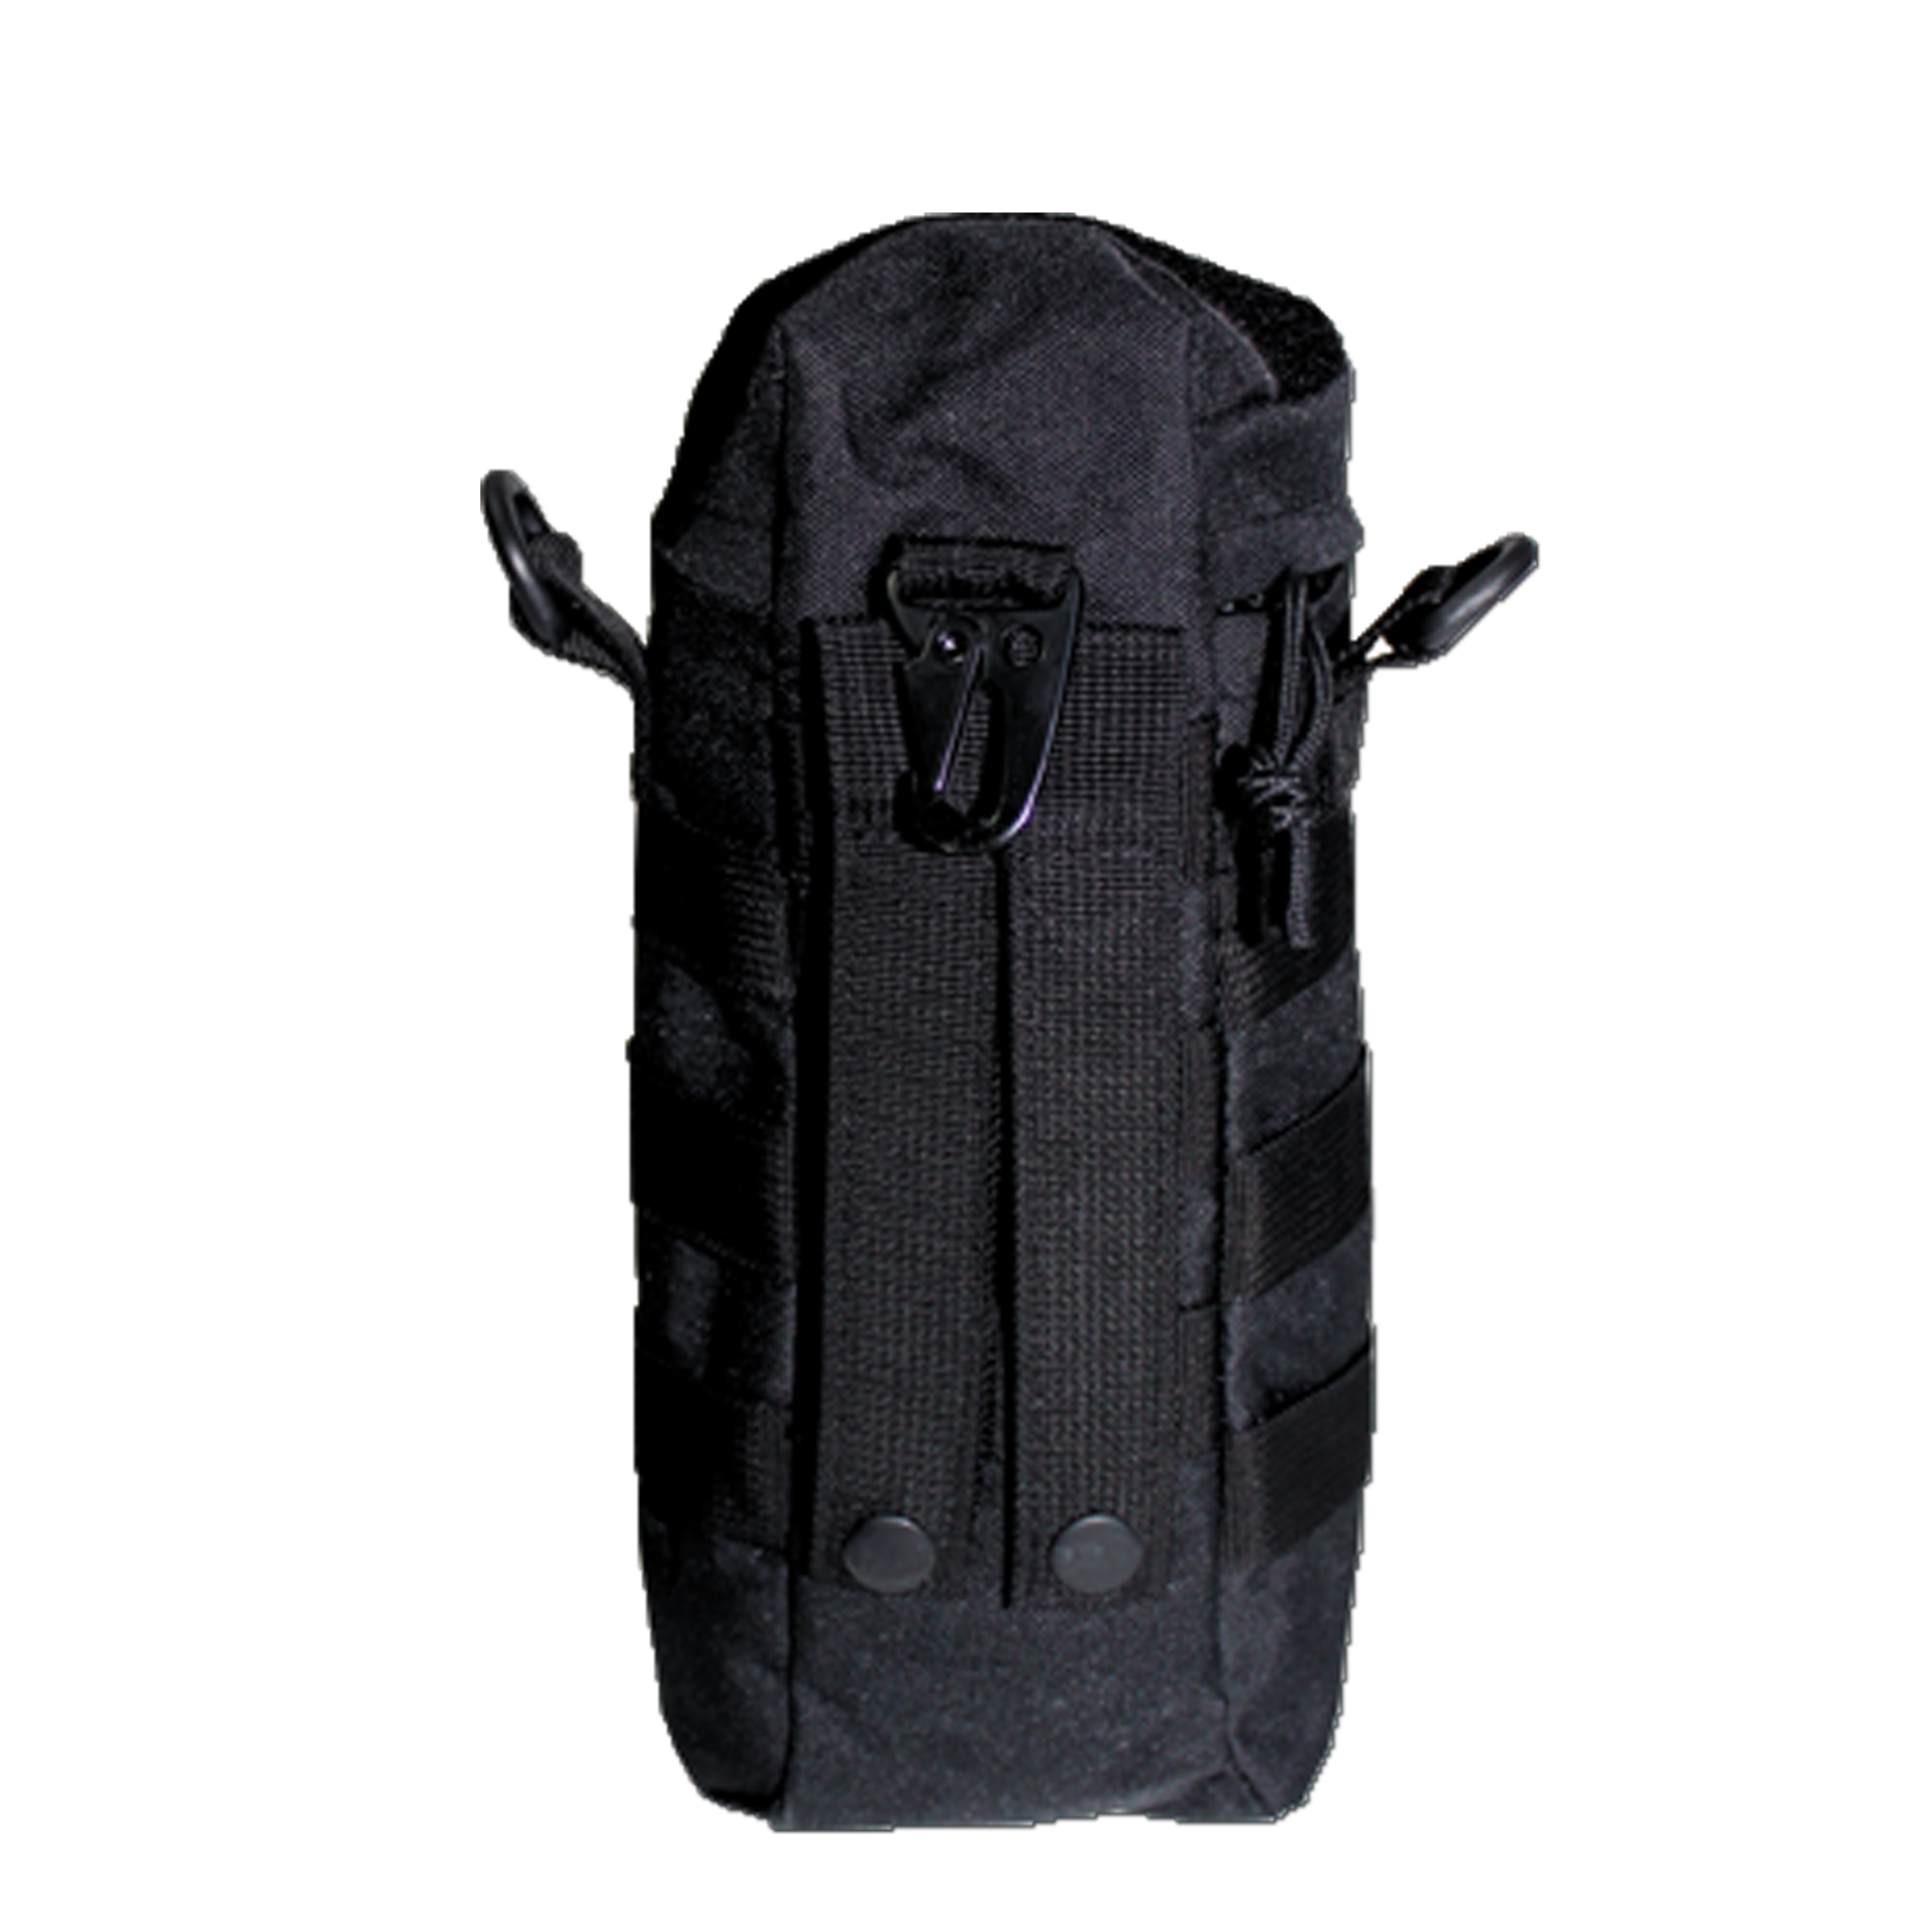 Purchase the MFH Pouch Round Molle black by ASMC